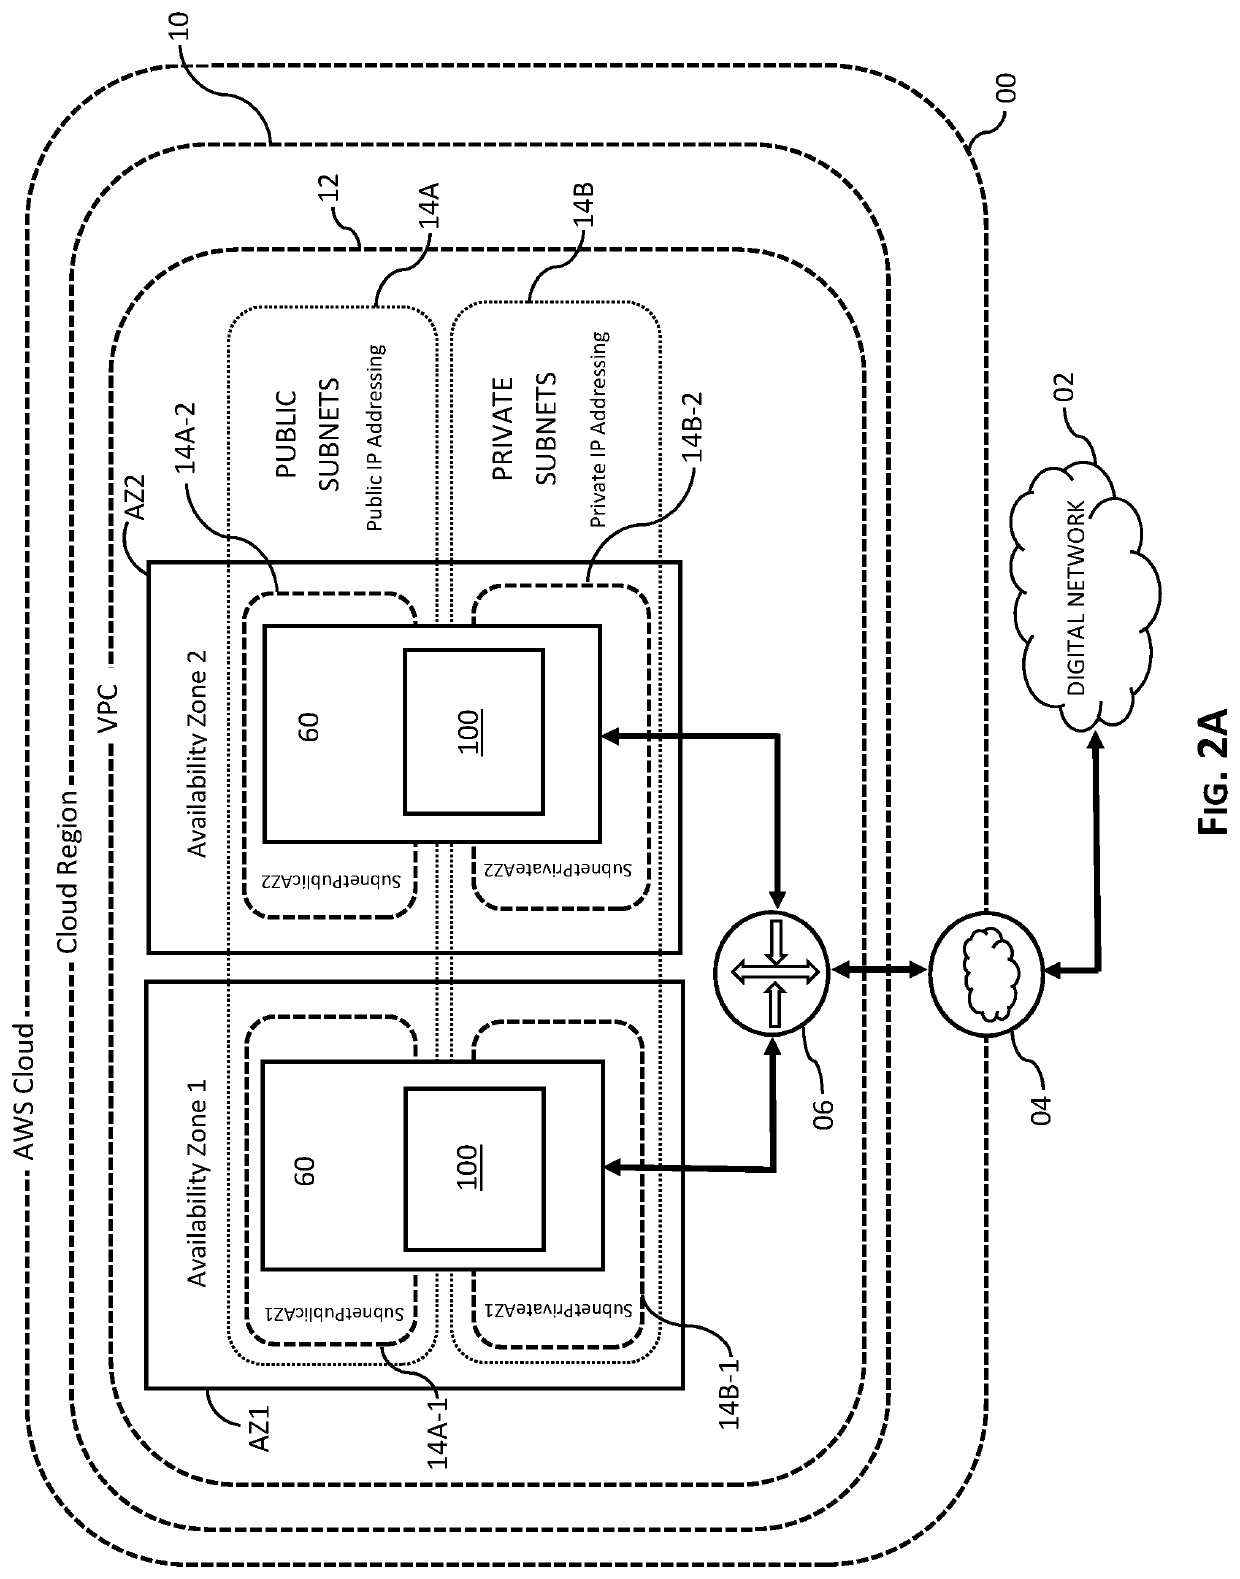 System, Method and Process for Protecting Data Backup from Cyberattack